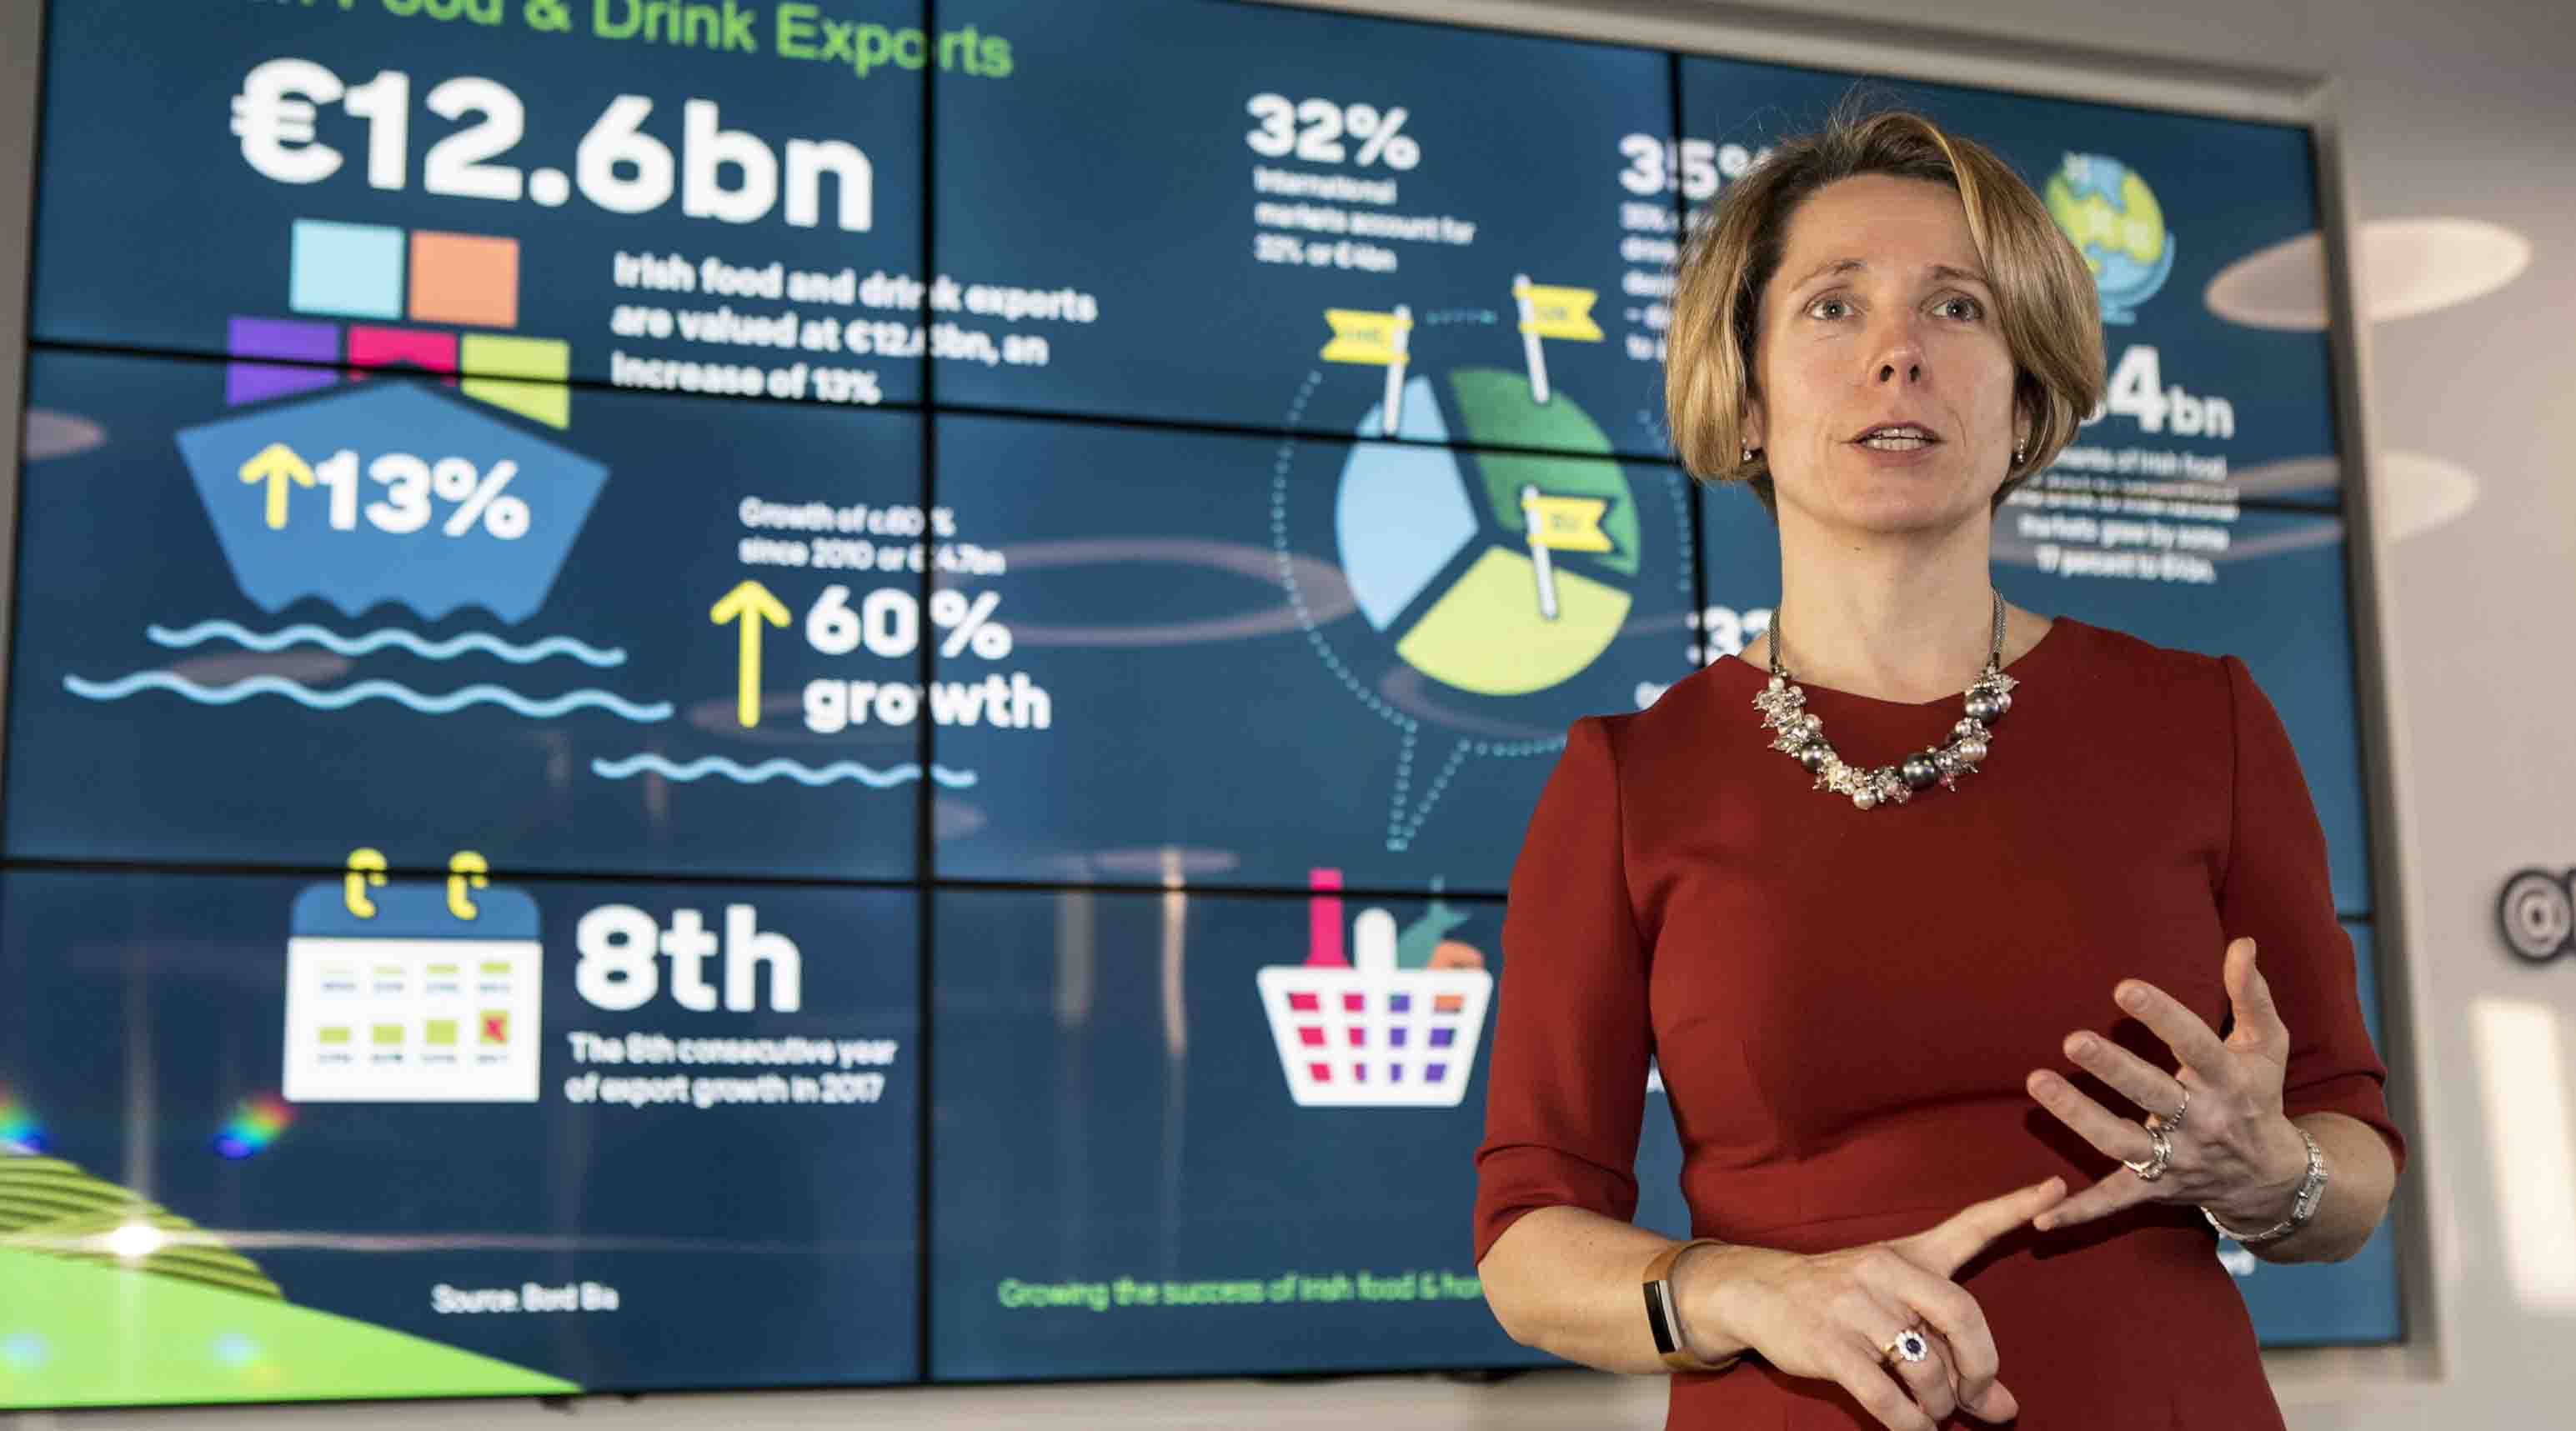 “The significant opportunities evident in beverages, in particular Irish whiskey, provide further reasoning for the positive outlook” – Tara McCarthy presenting Bord Bia’s 2017 Review & 2018 Outlook this morning.